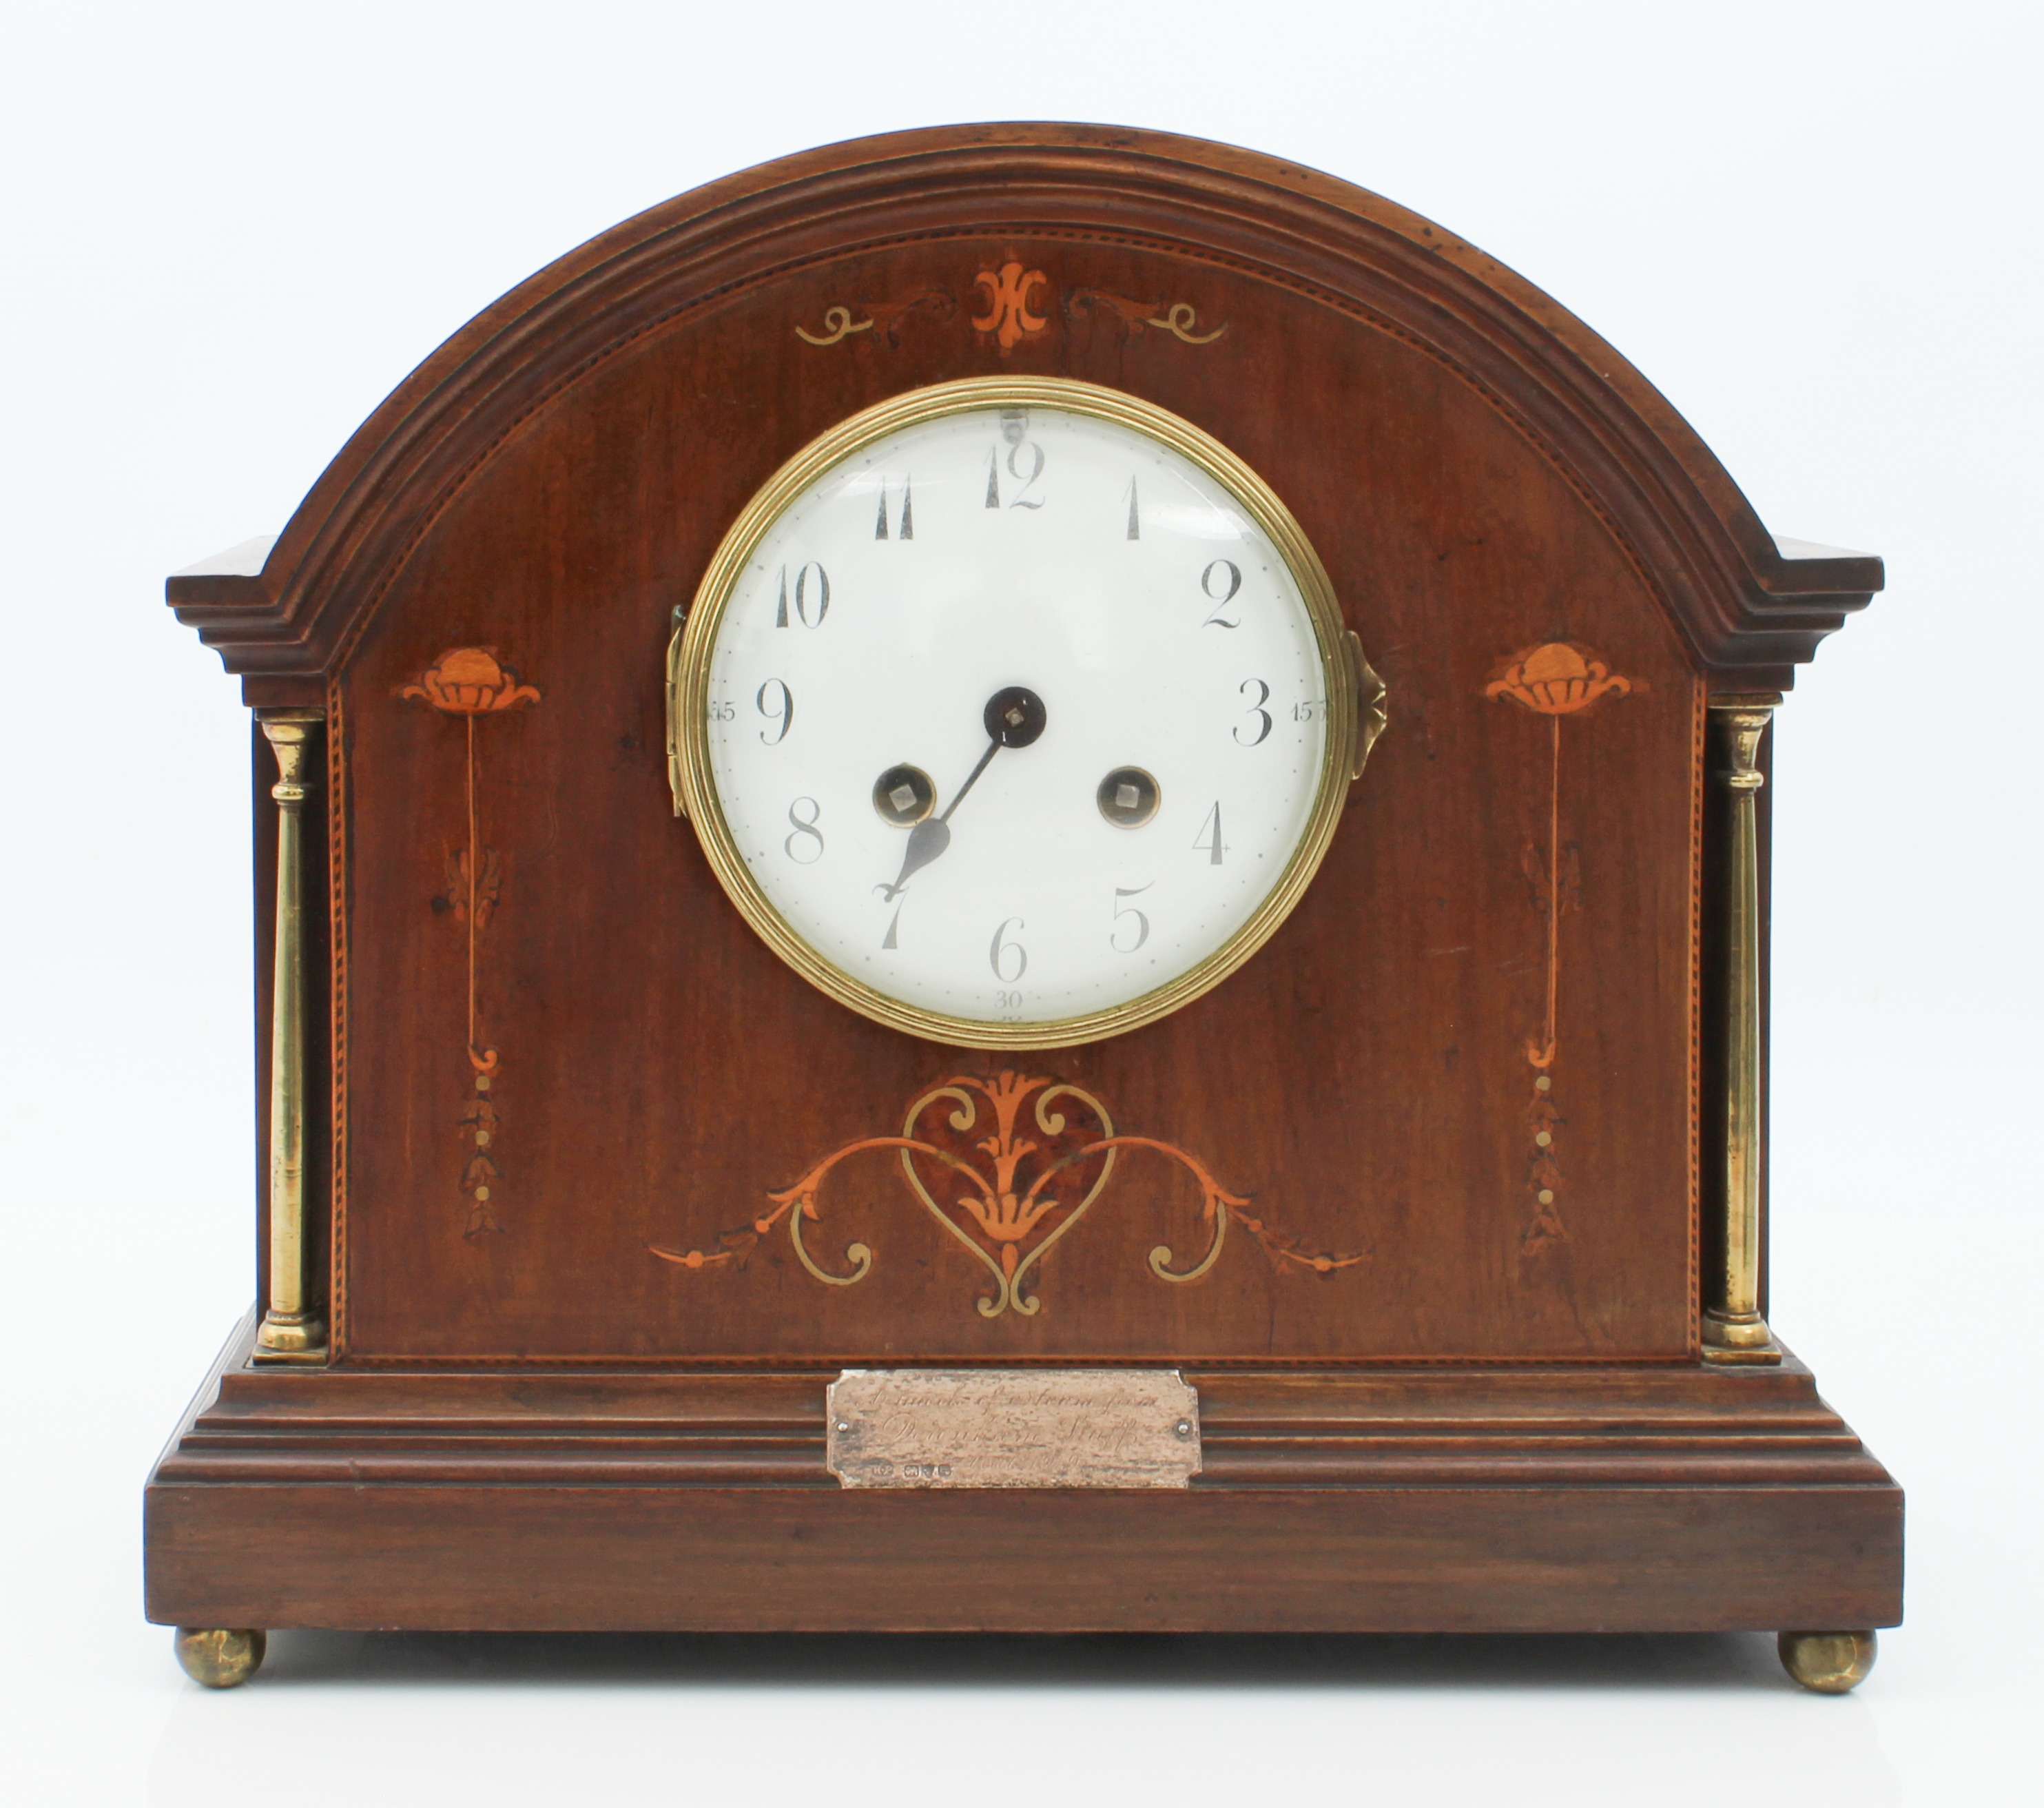 An early 20th century mahogany and marquetry cased mantel clock - the arched case with marquetry